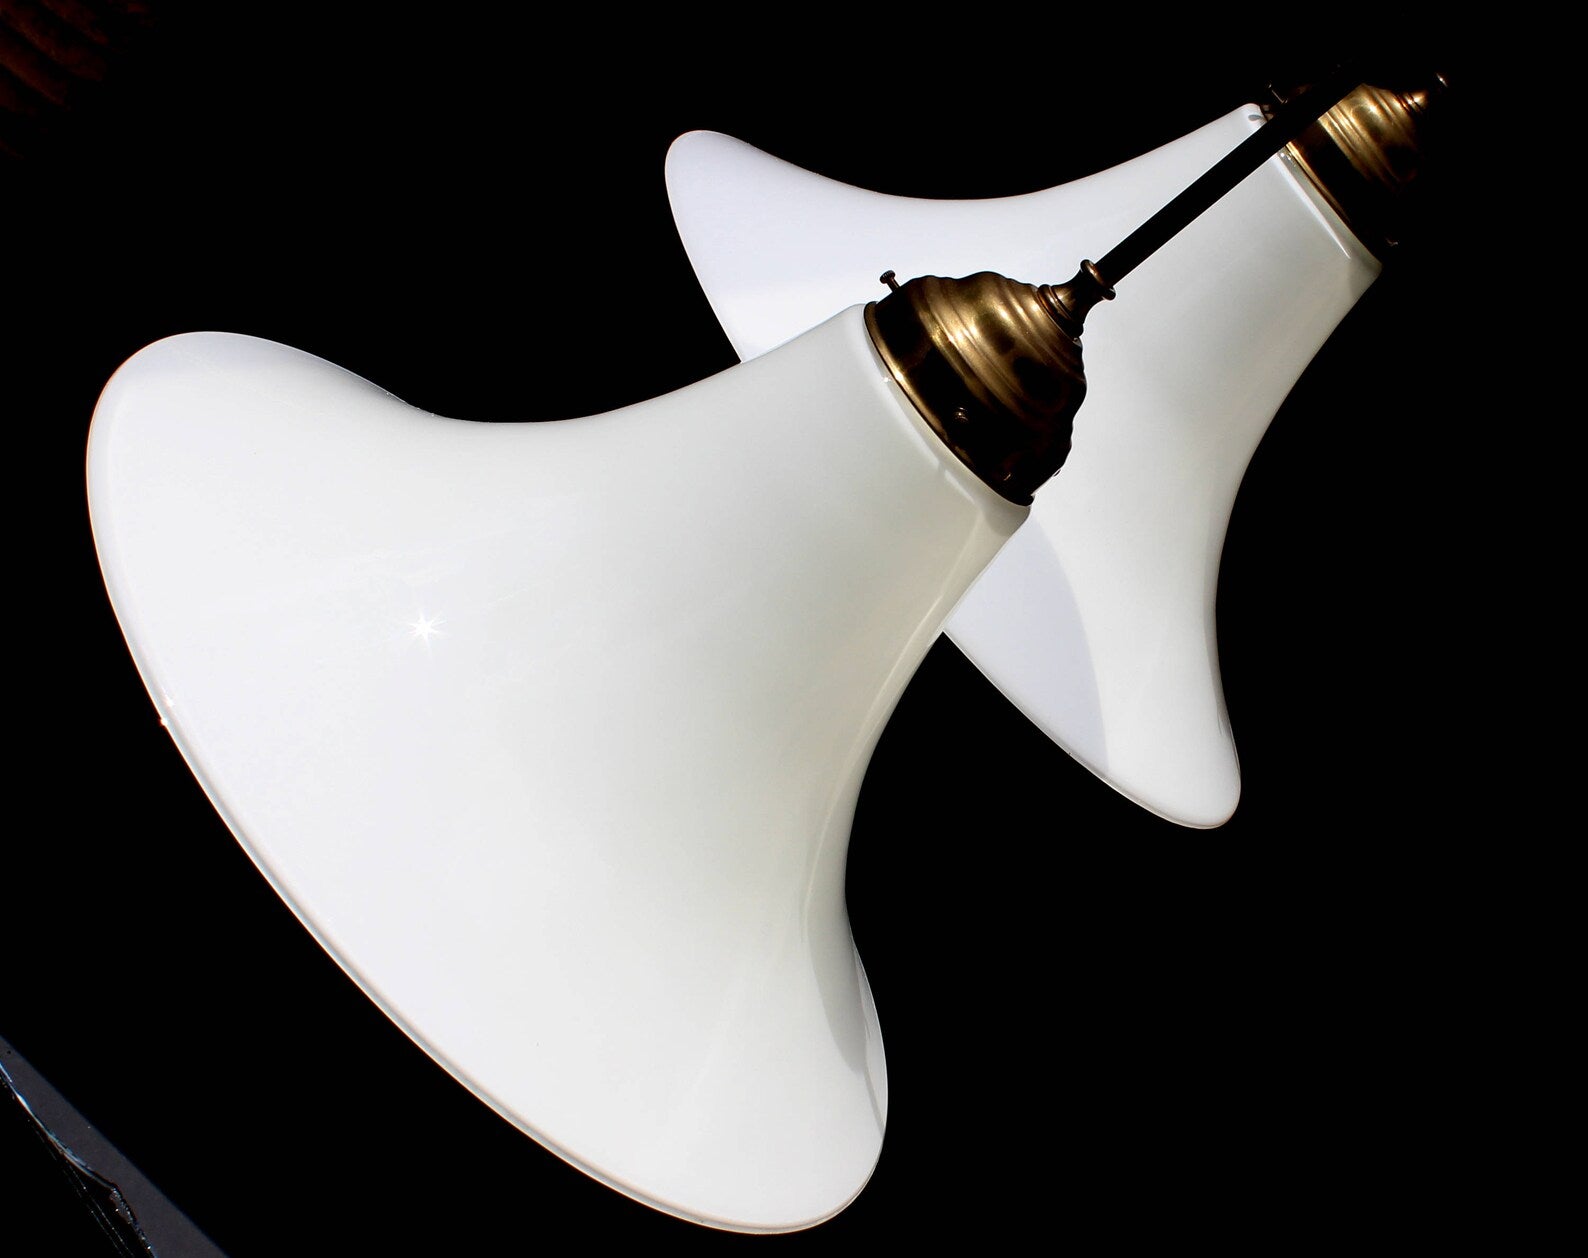 PAIR TULIP PENDANT LAMPS IN MILK GLASS WITH BRASS ELEMENTS, GOERZ-WERKE BERLIN

These well-preserved after war replications of 1920 Berlin design are in very good vintage condition, but rewired. The lights are working with E27 bulbs . The brass